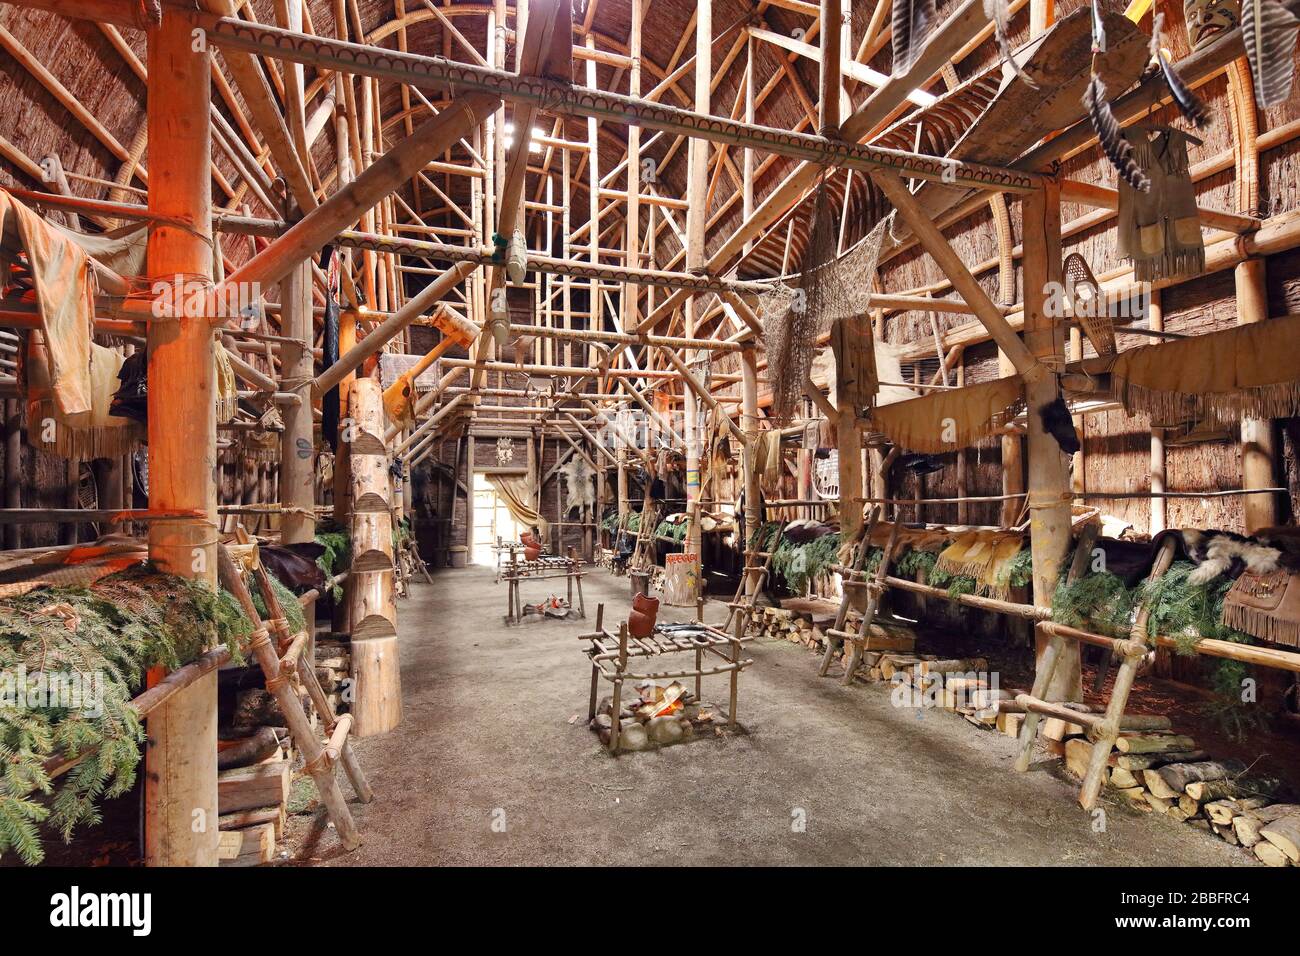 Reconstructed interior of the Ekionkiestha Longhouse on the Huron-Wendat Nation reservation, which is located in the Onhoua Chetek8e Traditional Huron Site, Wendake, Quebec City, Province of Quebec, Canada Stock Photo